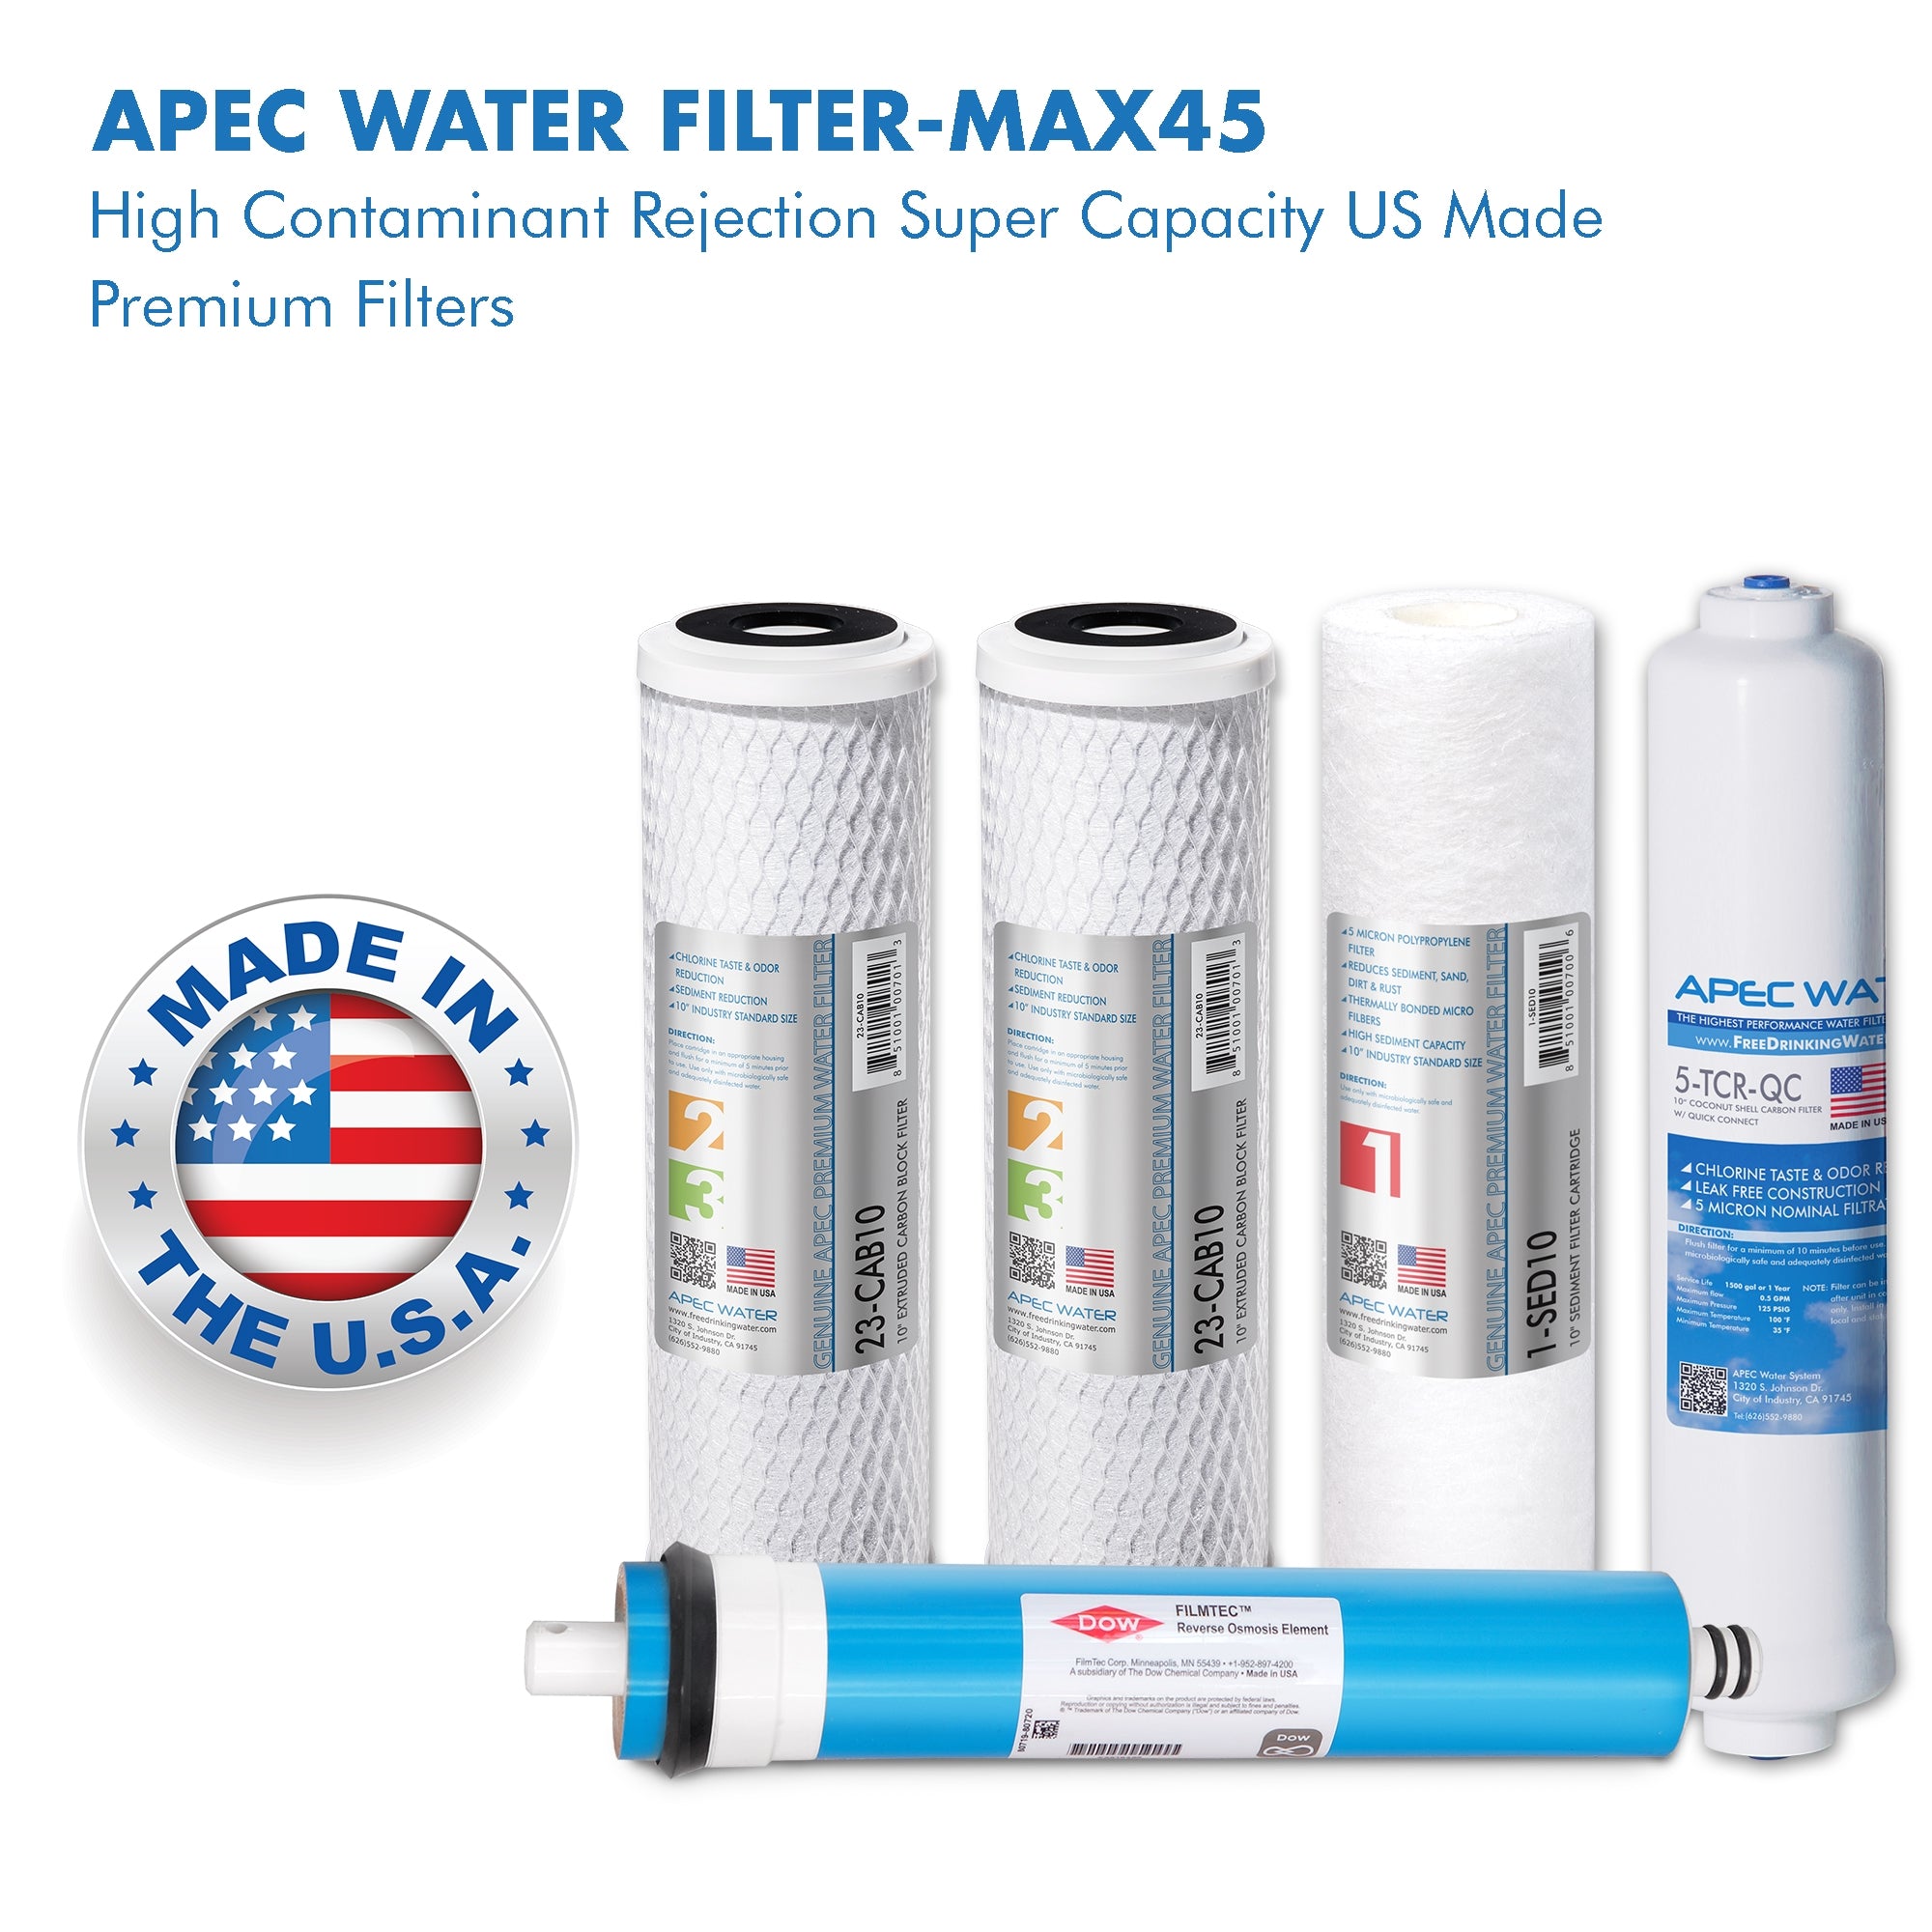 APEC RO Replacement Filters Complete Filter Set for ULTIMATE RO-45 and RO-PUMP Models - With 1/4" Tubing (Stages 1-5)